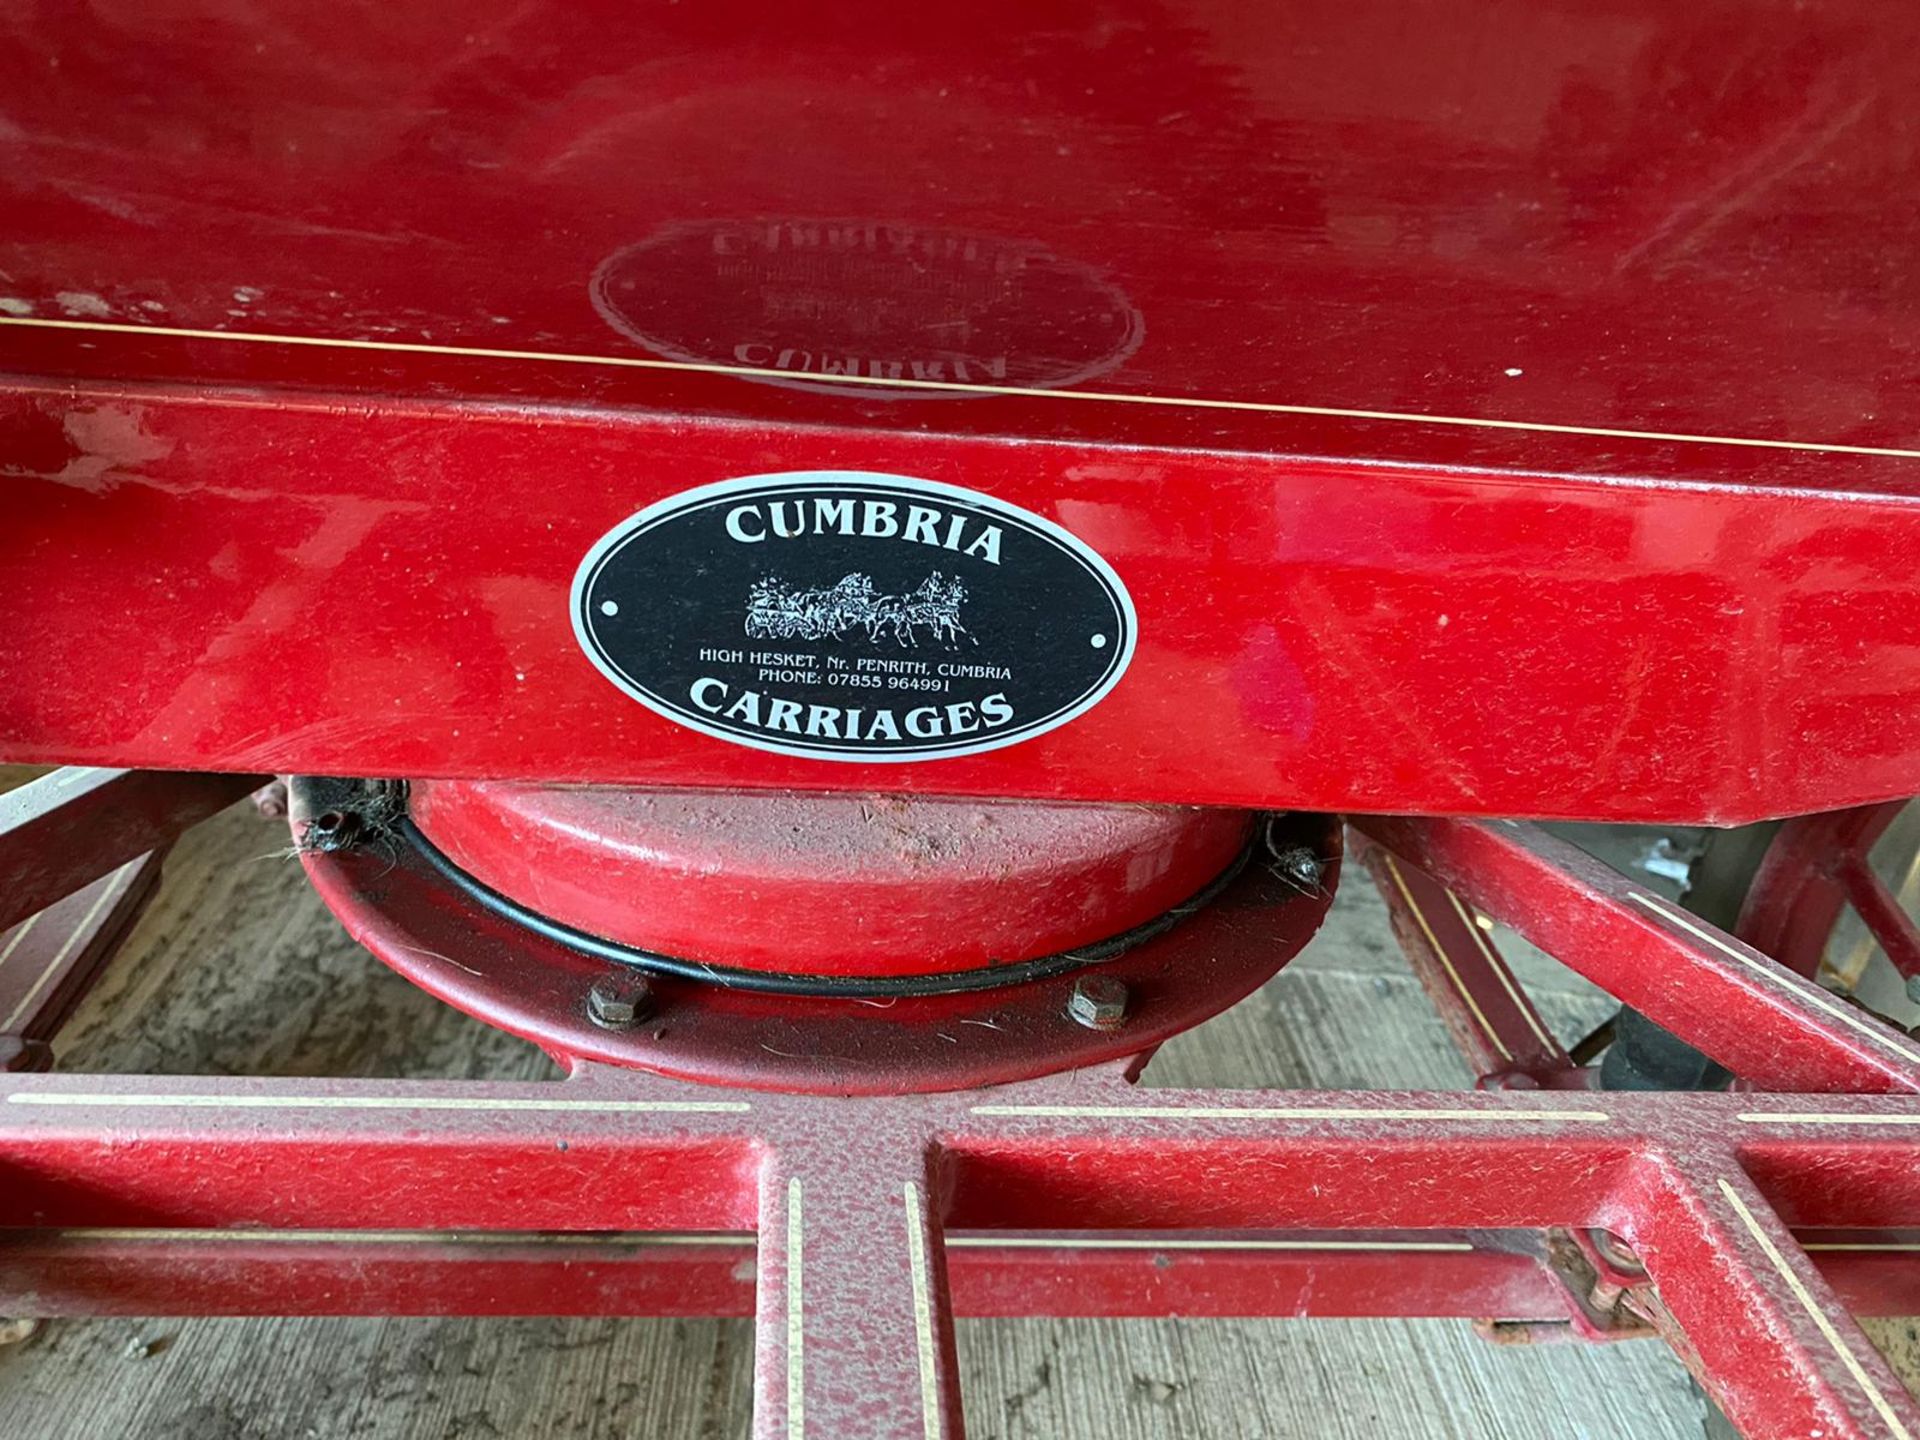 CUMBRIA CARRIAGES 4 WHEEL HORSE CART LOCATION: NORTH YORKSHIRE - Image 4 of 4